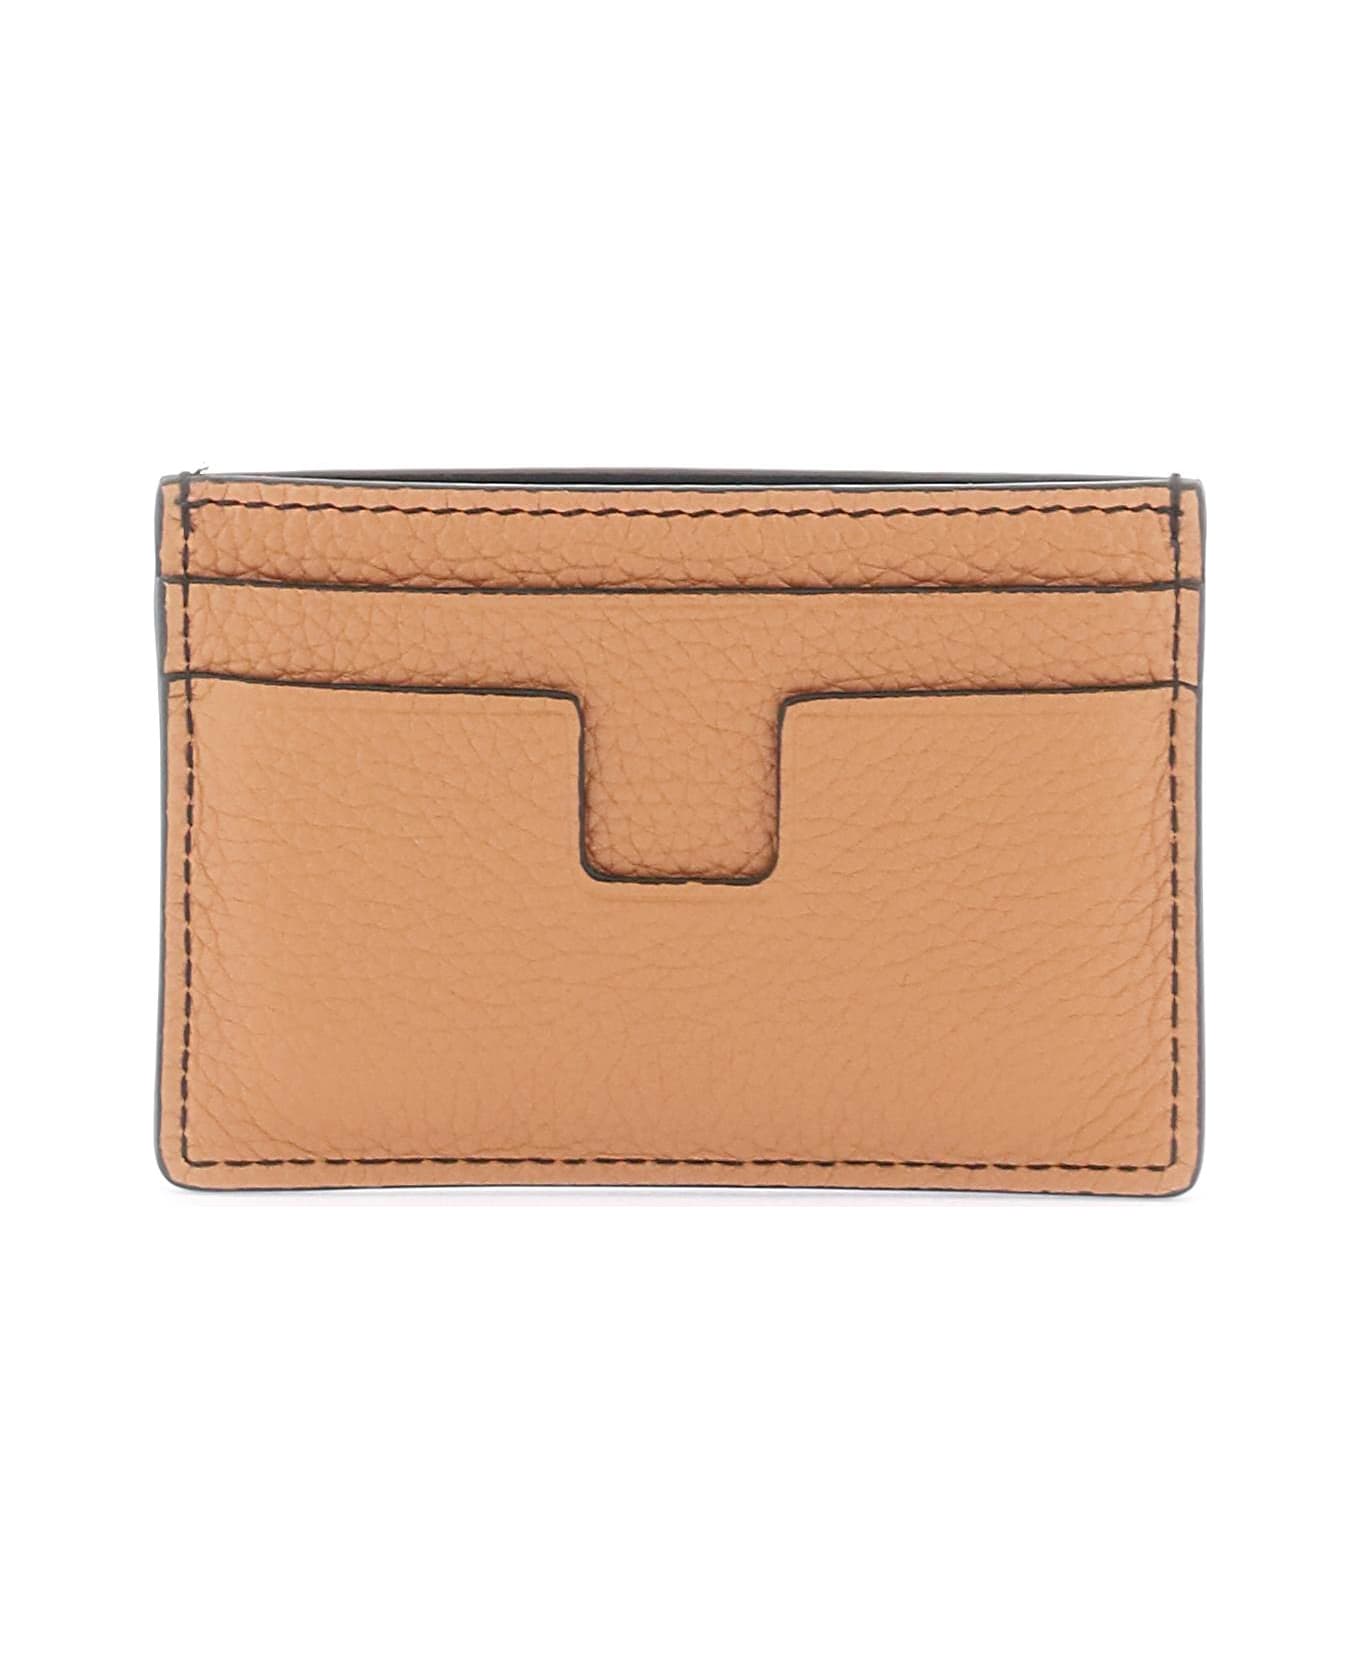 Tom Ford Grained Leather Card Holder - CHOCOLATE ALMOND (Beige) 財布